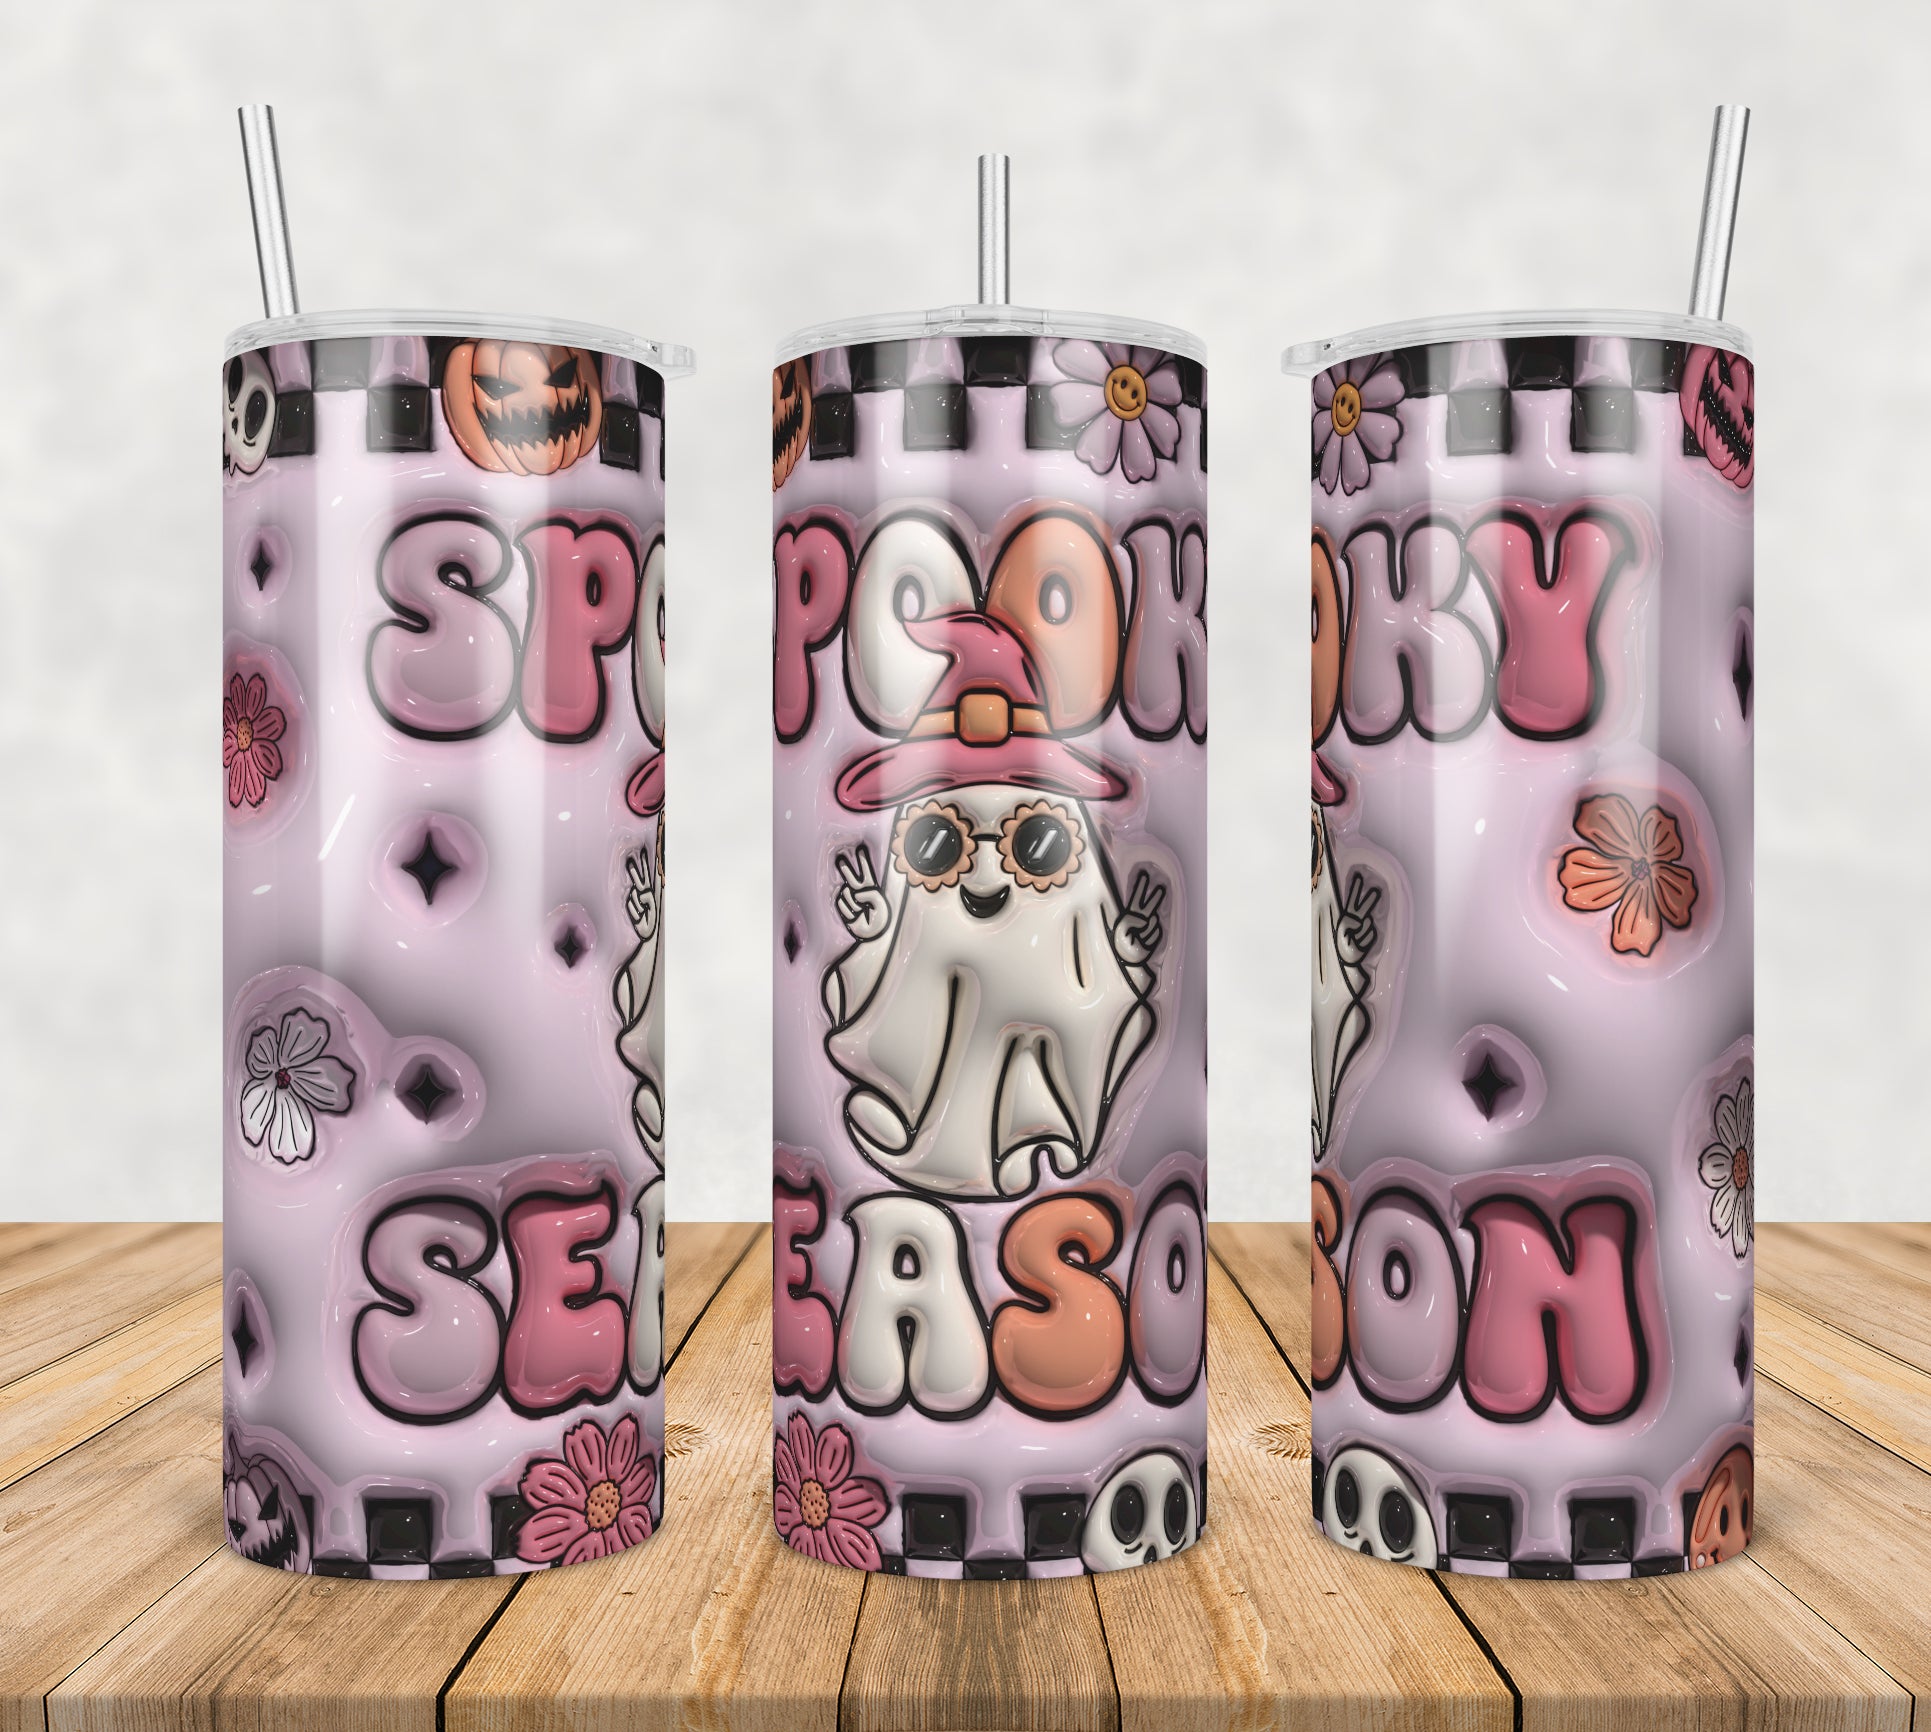 3D Inflated spooky season,3d inflated tumbler wrap, 20oz Skinny Tumbler png,digital dowwnload.